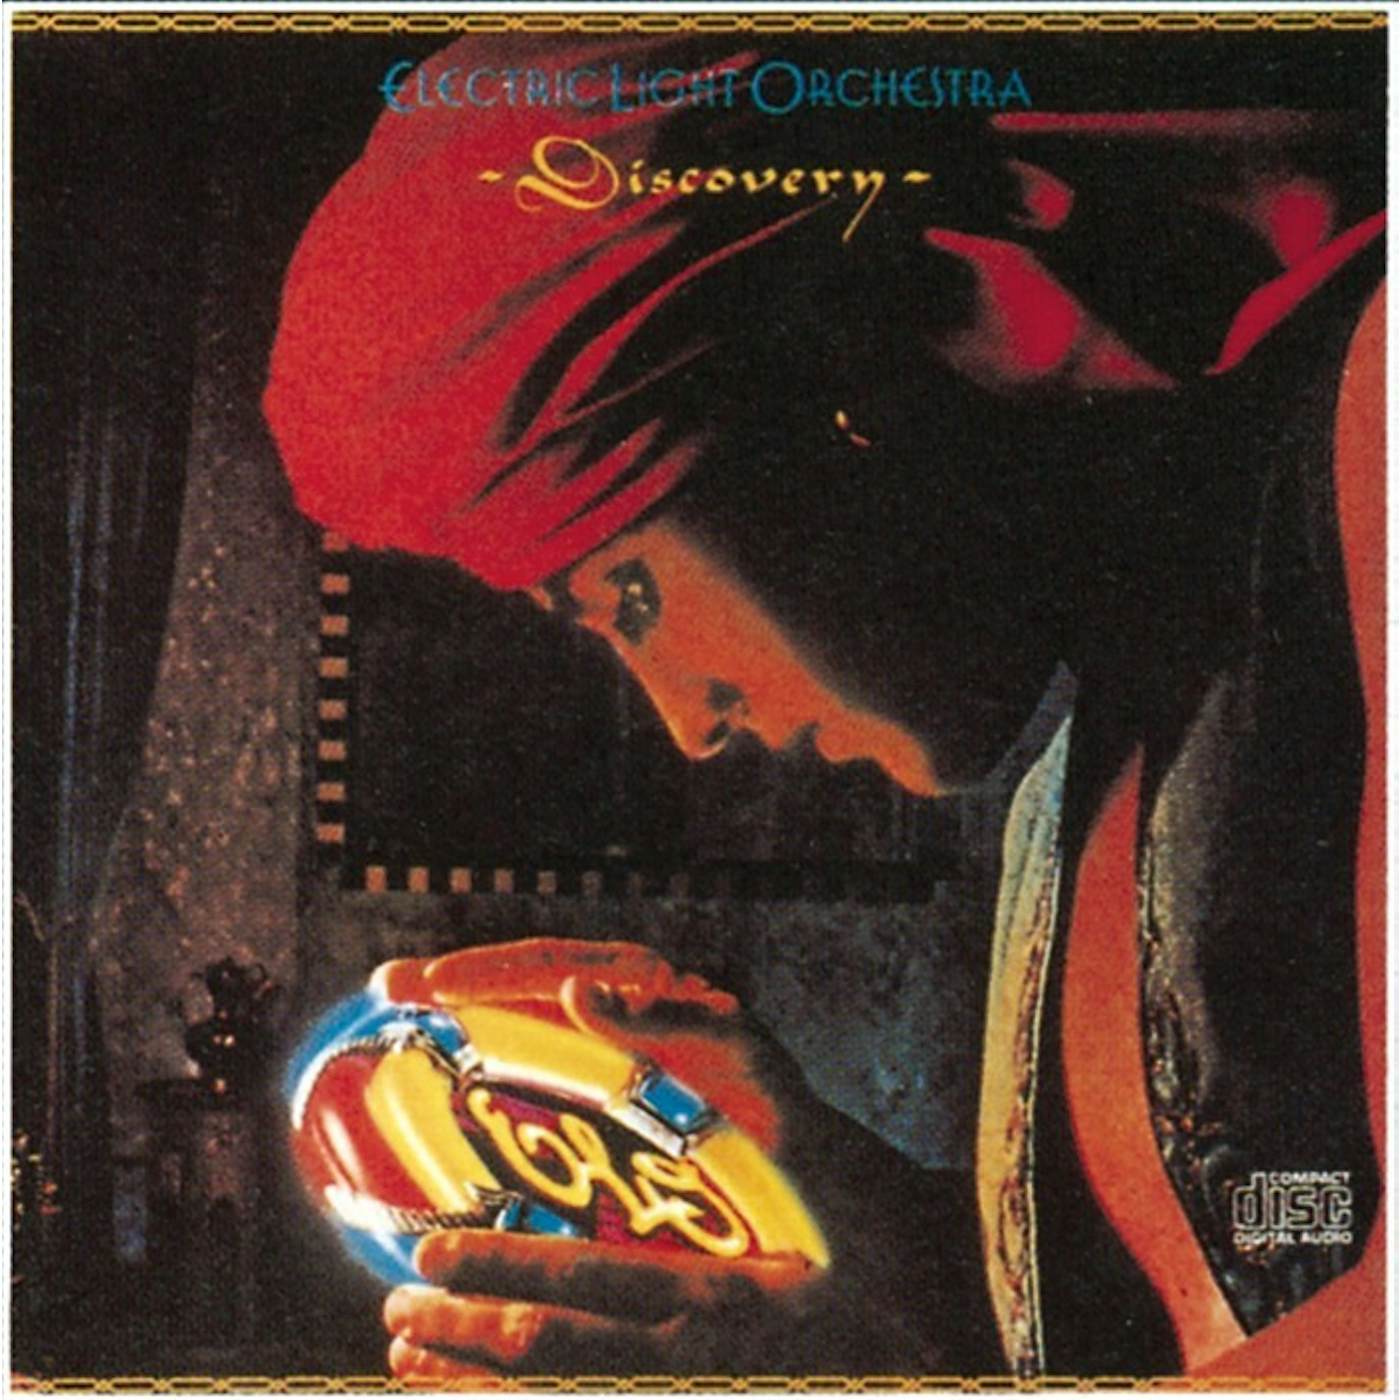 ELO (Electric Light Orchestra) DISCOVERY CD